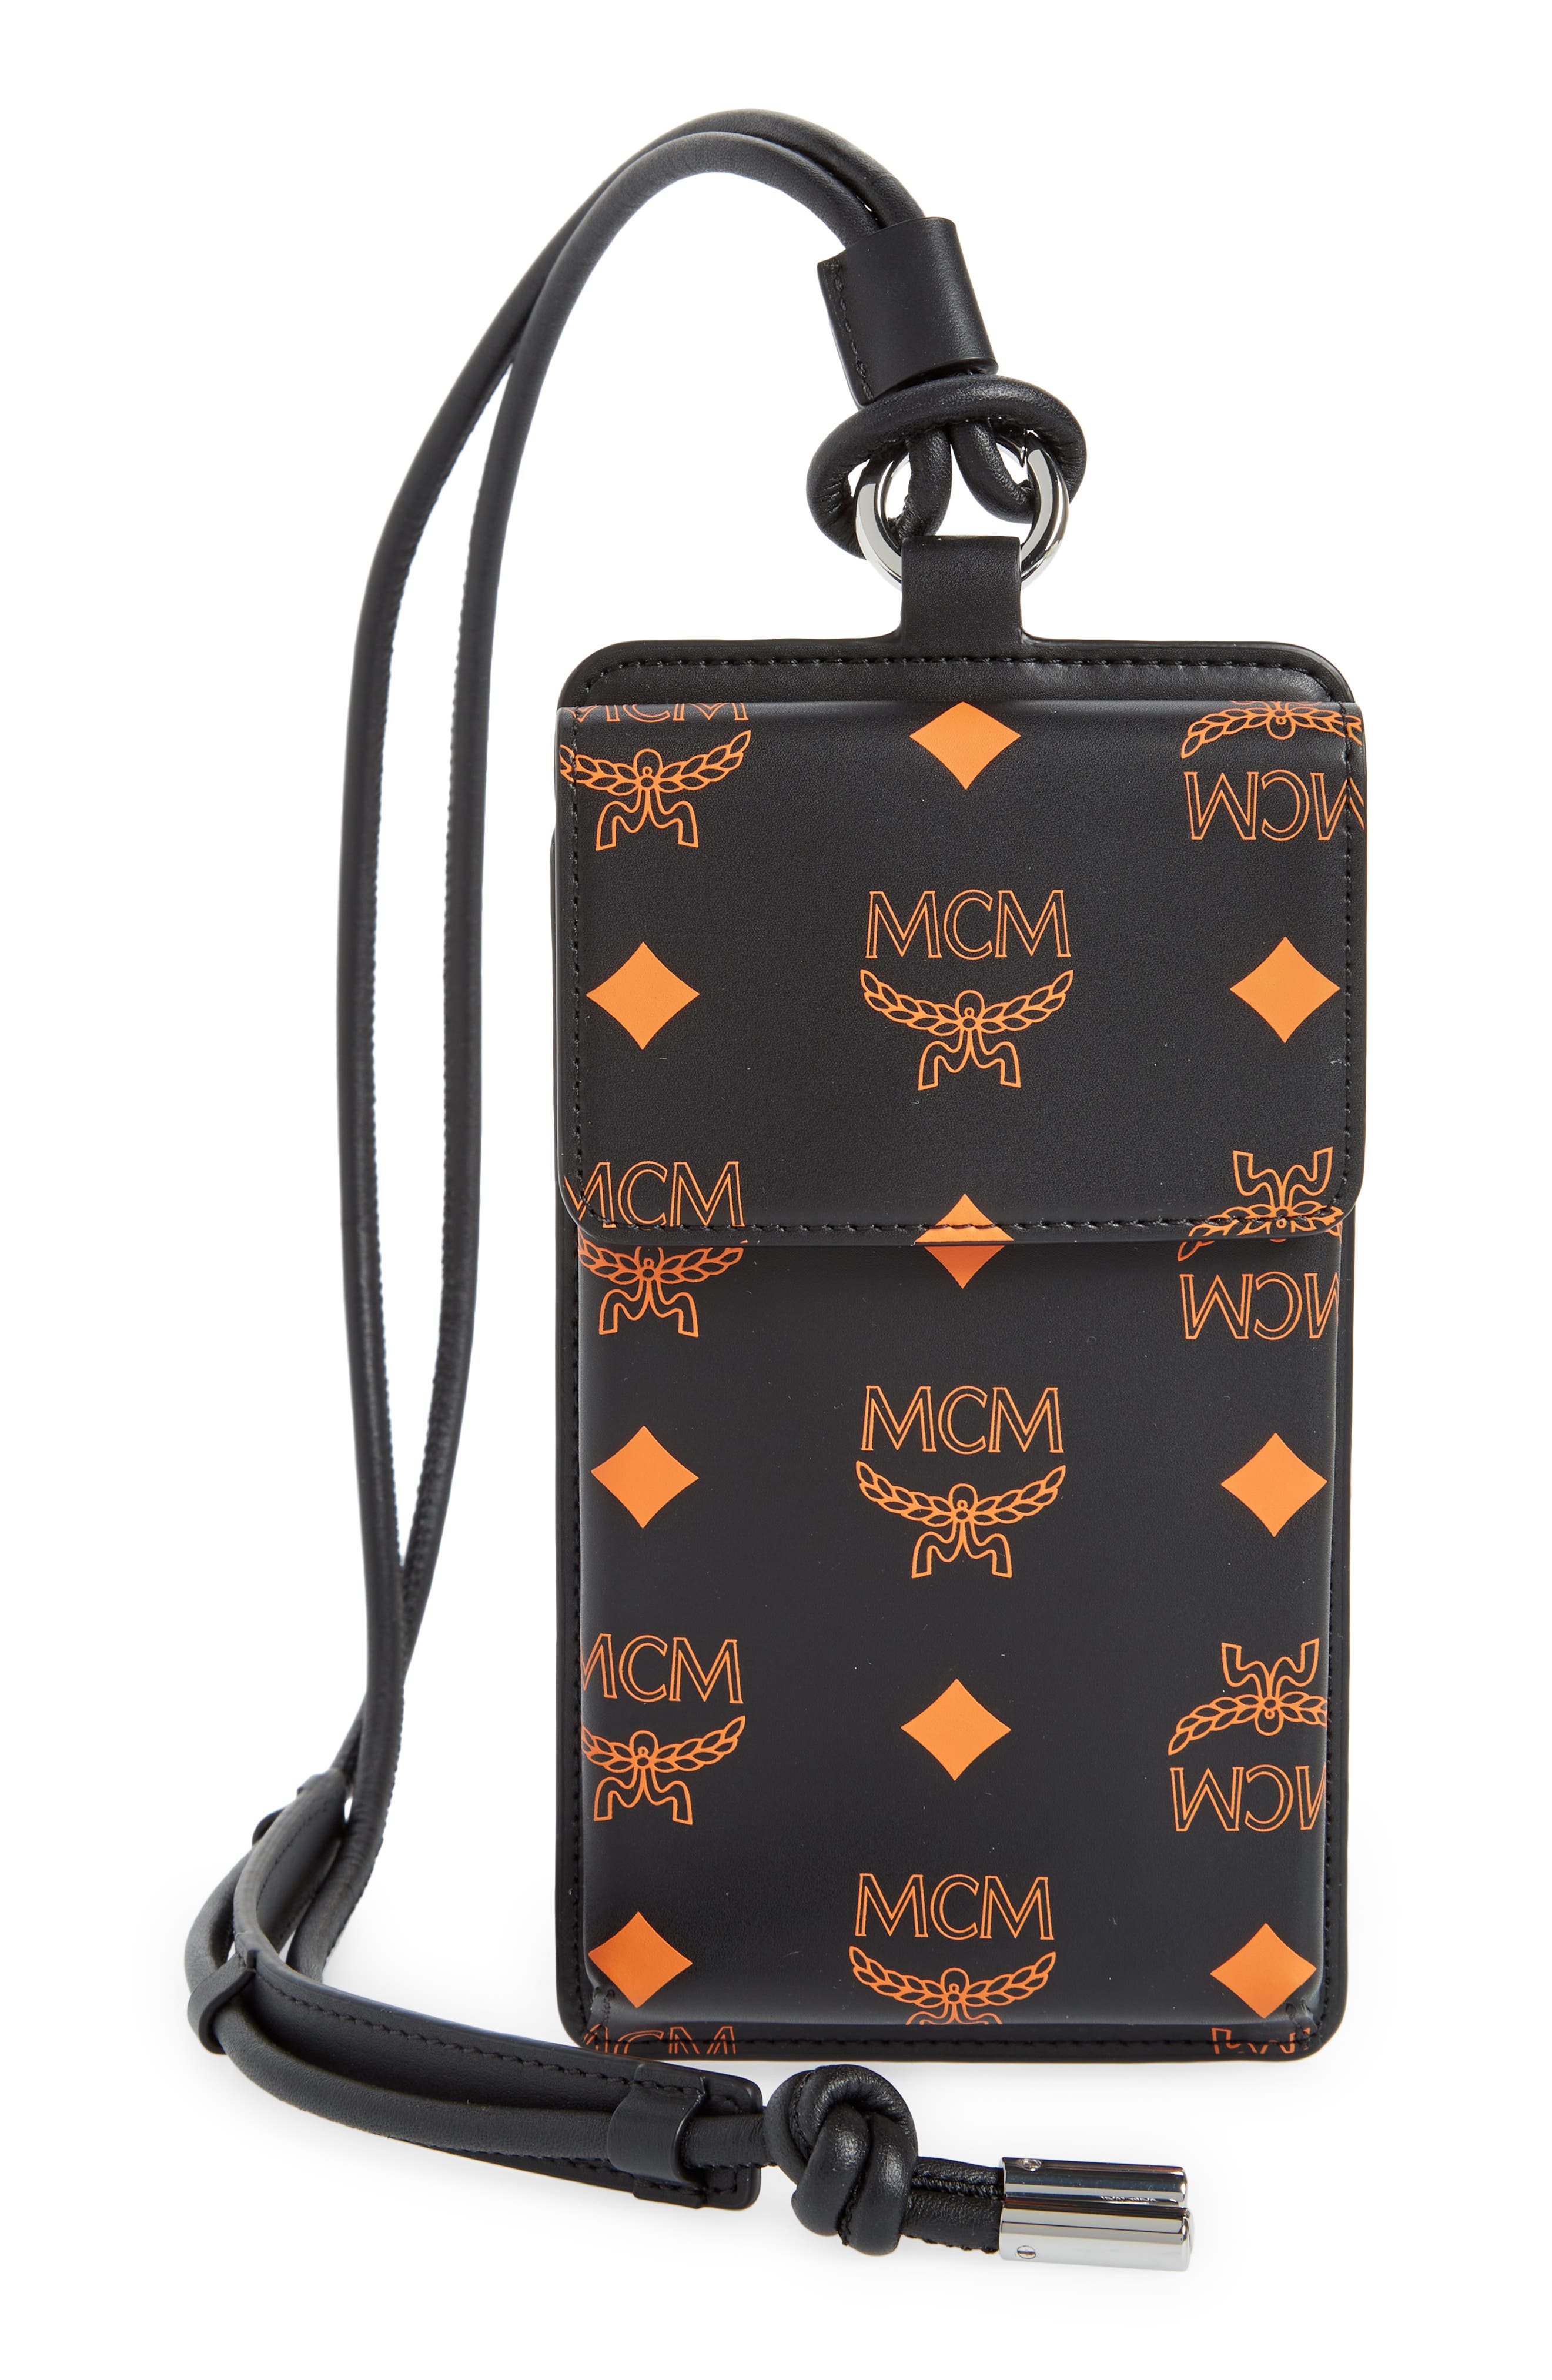 MCM Logo Smartphone Wallet with Lanyard Strap in Persimmon Orange at Nordstrom